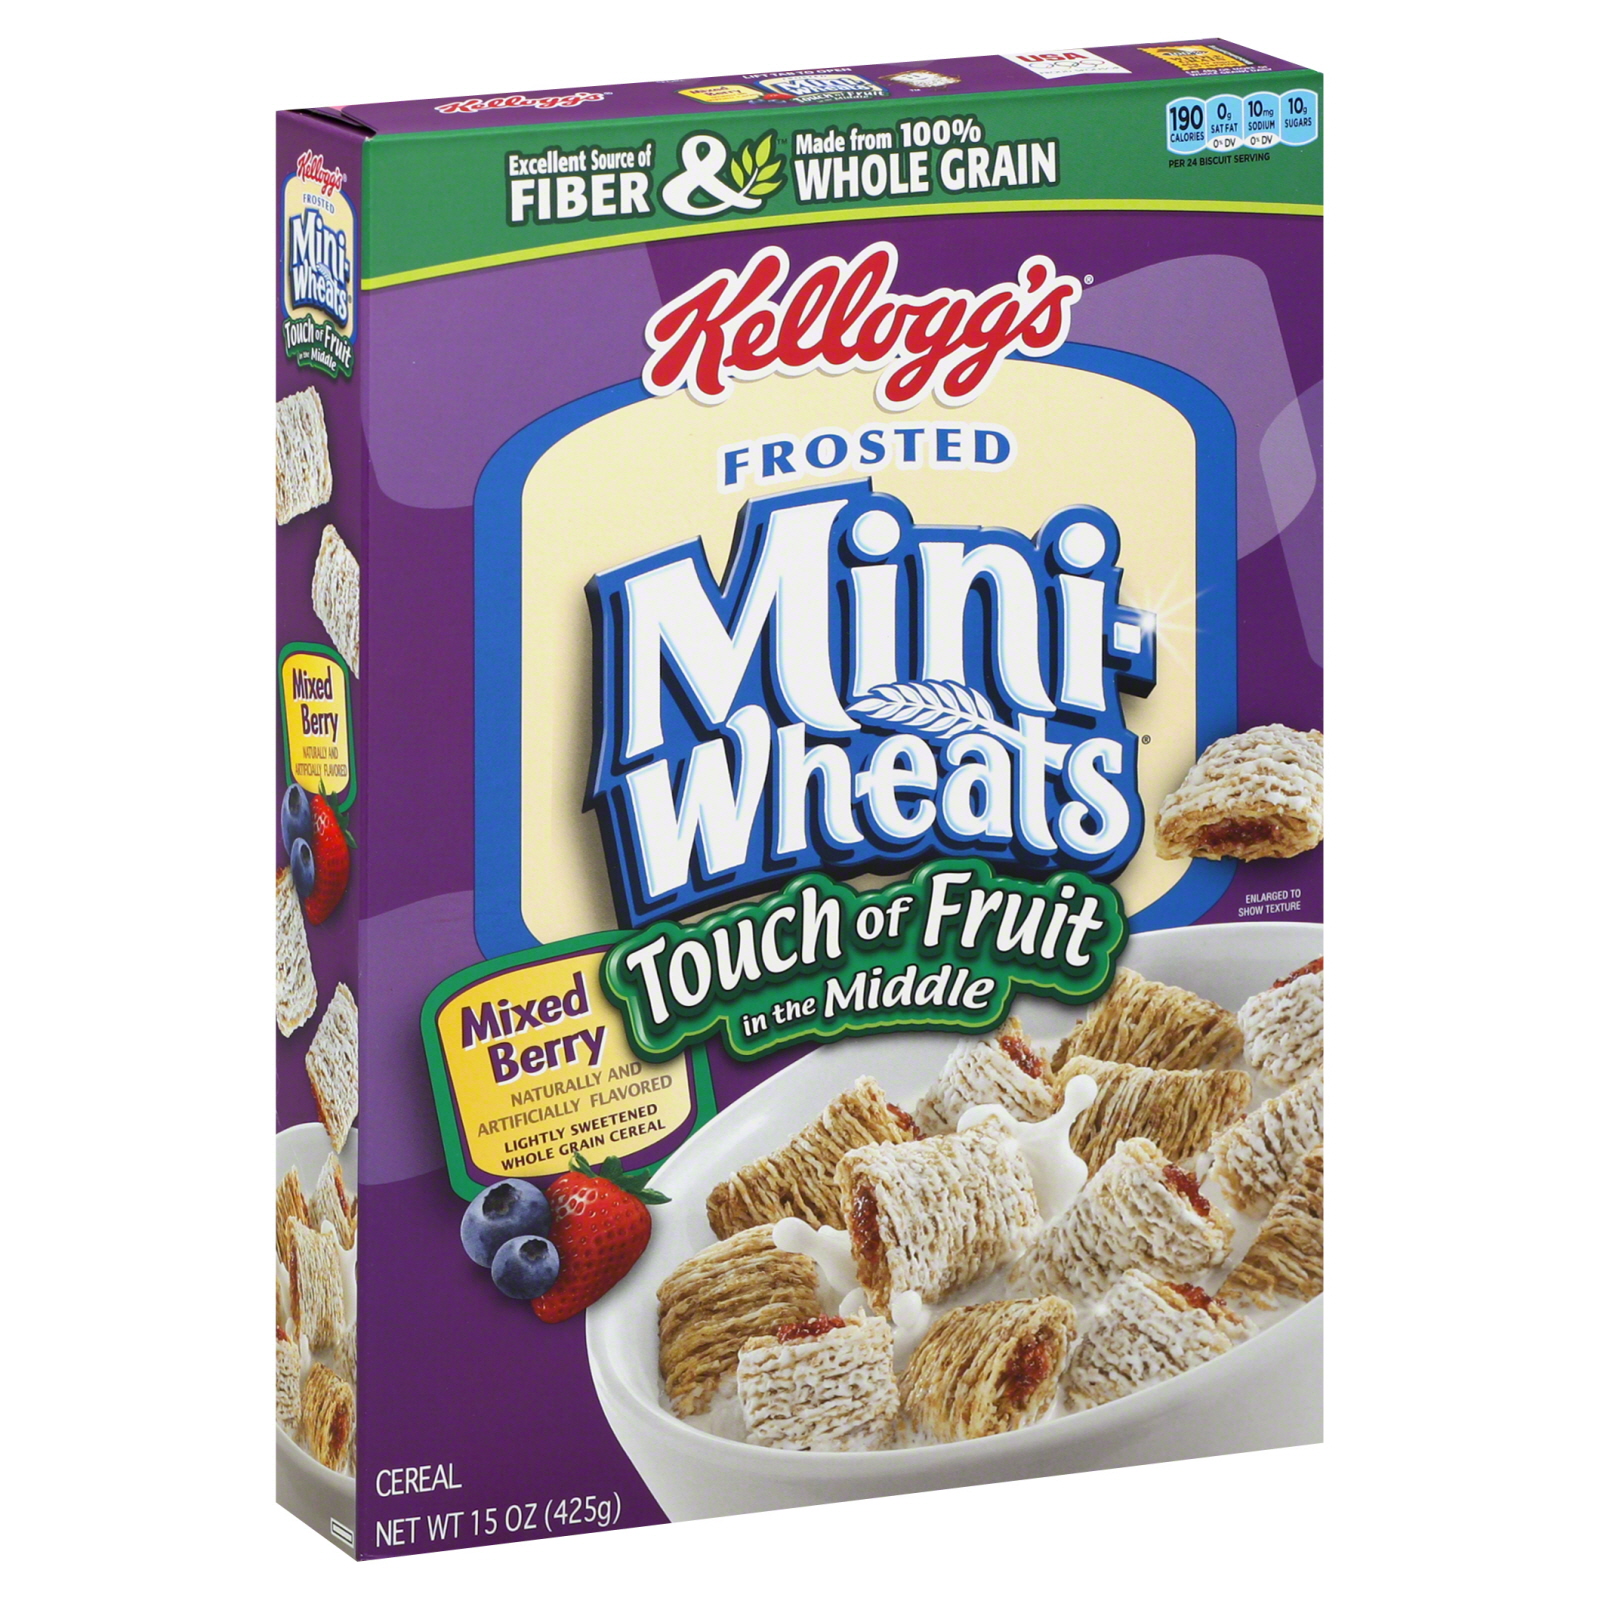 0038000713187 - FROSTED MINI-WHEATS CEREAL TOUCH OF FRUIT IN THE MIDDLE MIXED BERRY BOXES